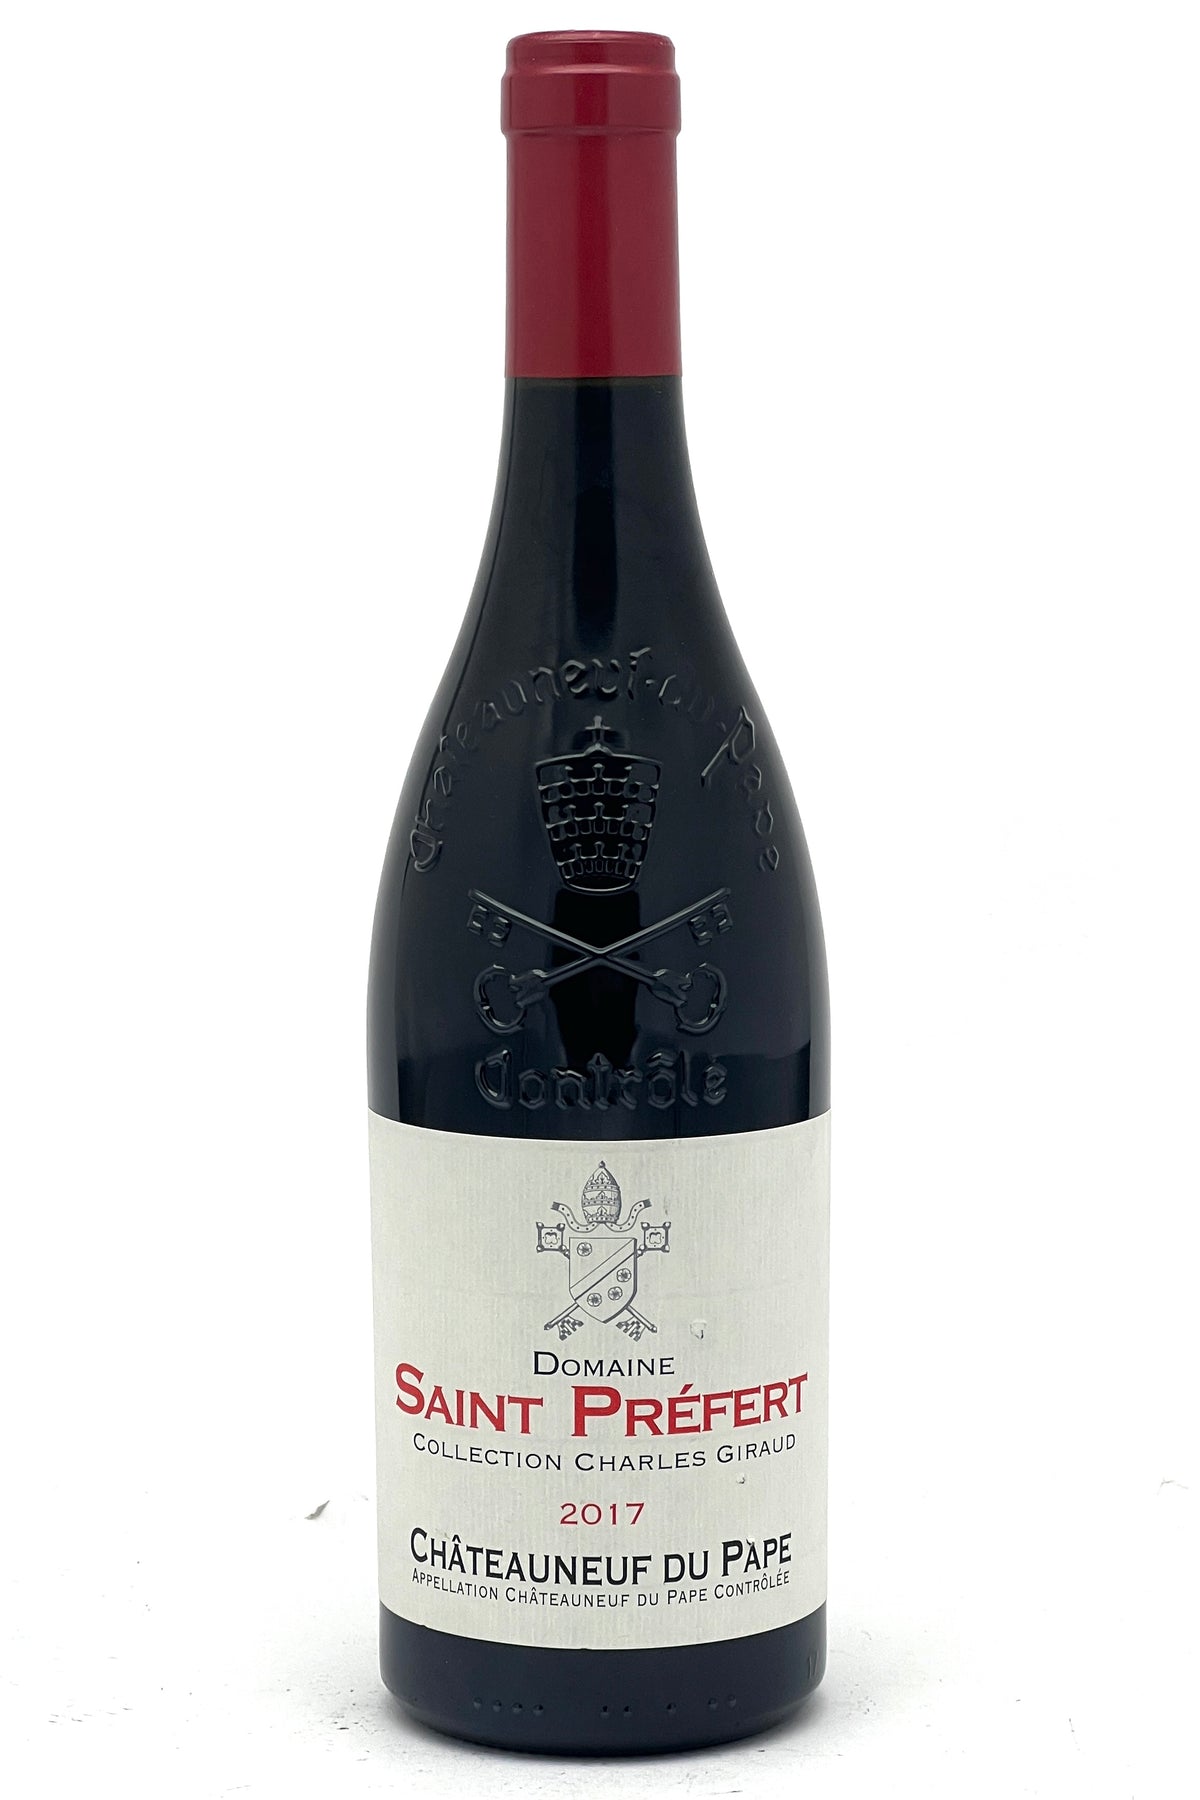 Domaine Saint Prefert 2017 Chateauneuf-du-Pape Collection Charles Giraud